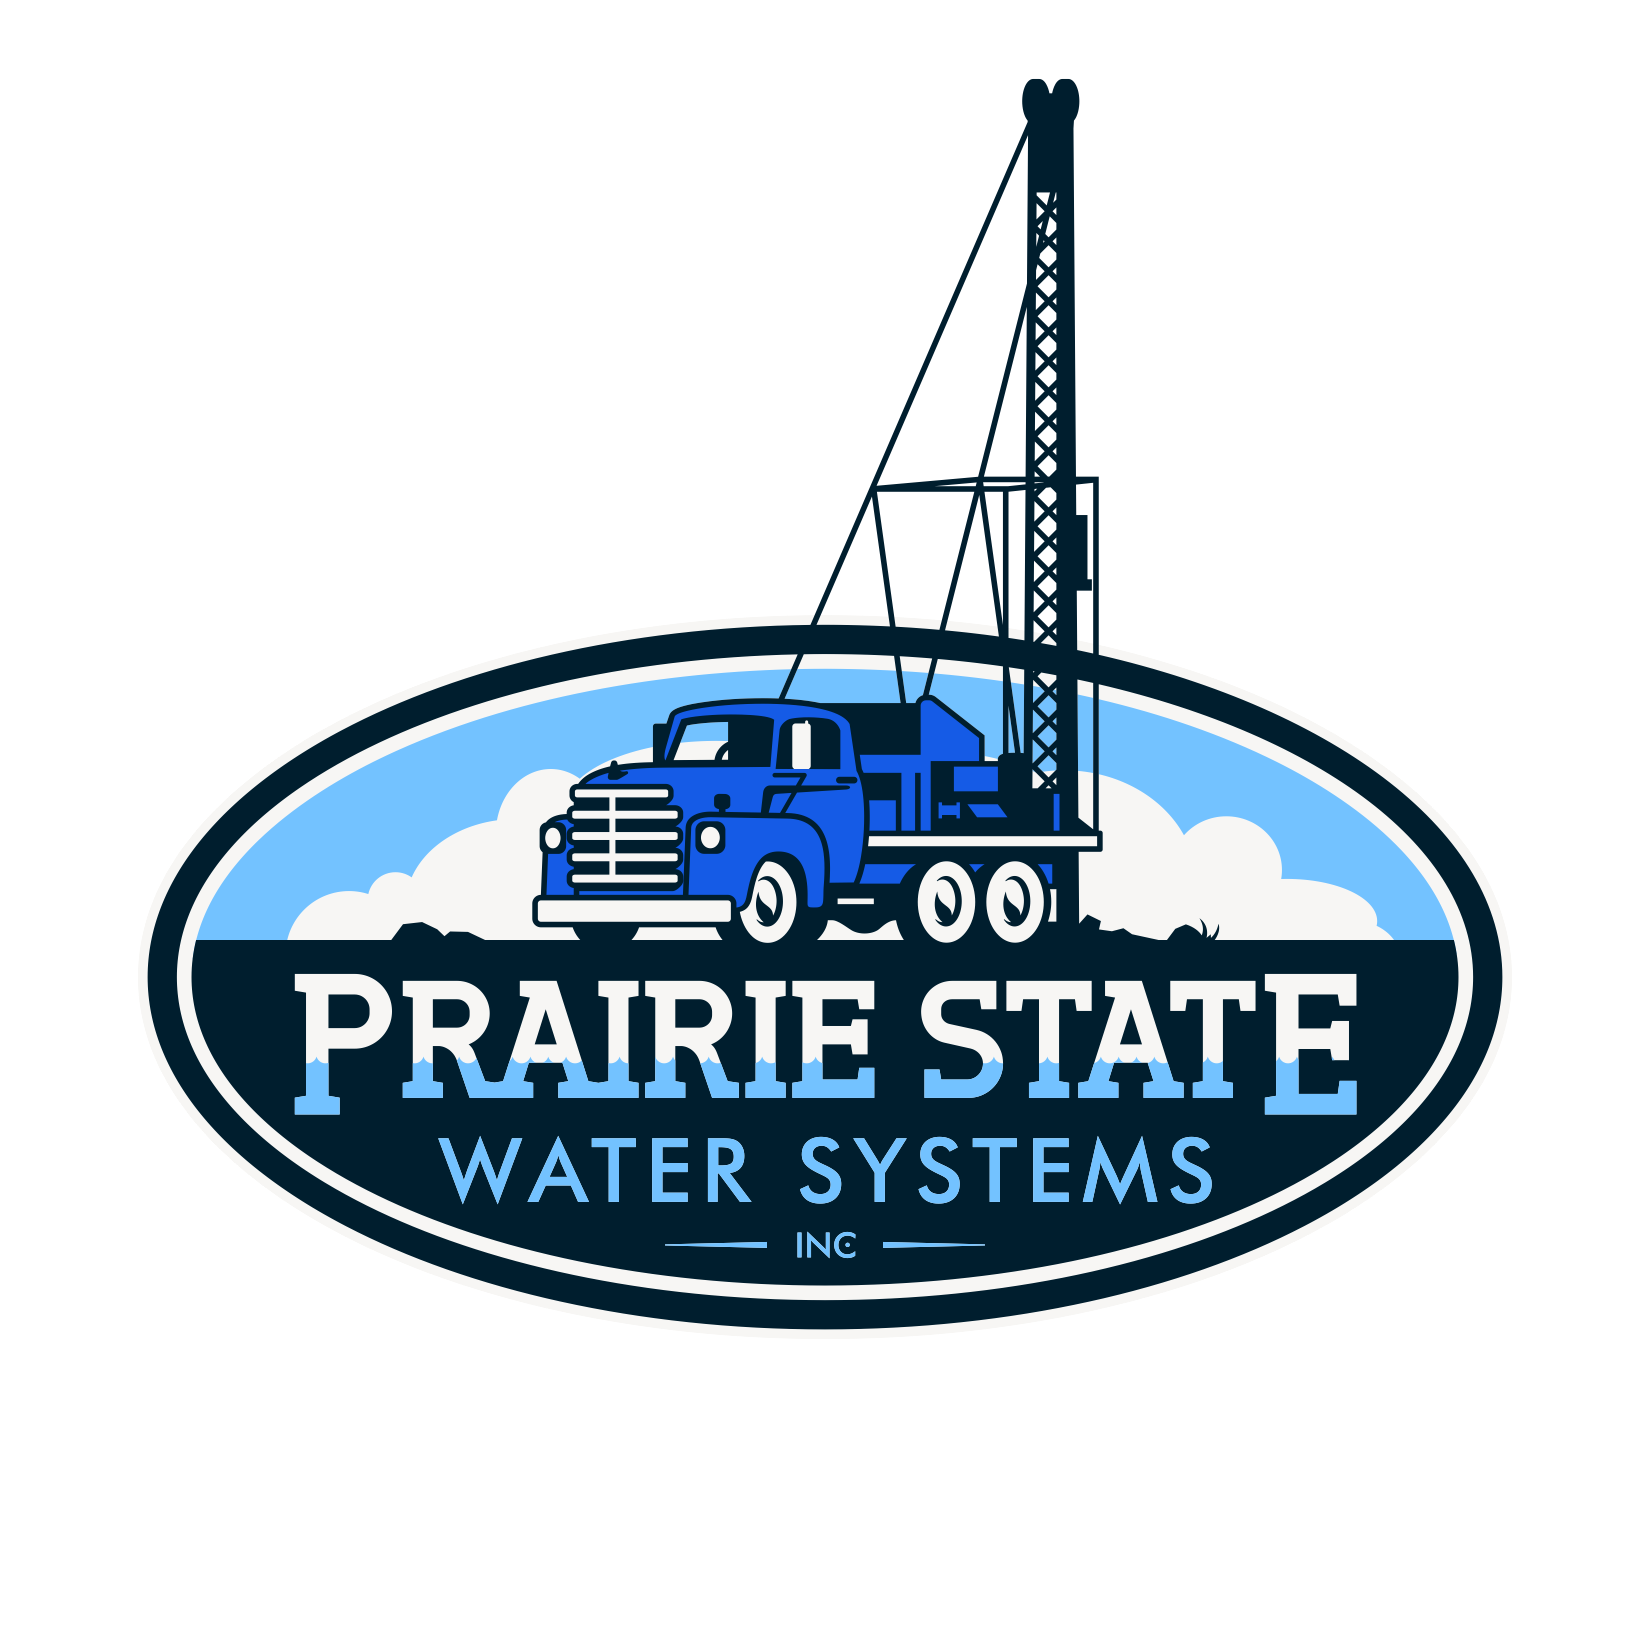 Prairie State Water Systems Inc. 48W557 IL-64, Maple Park Illinois 60151